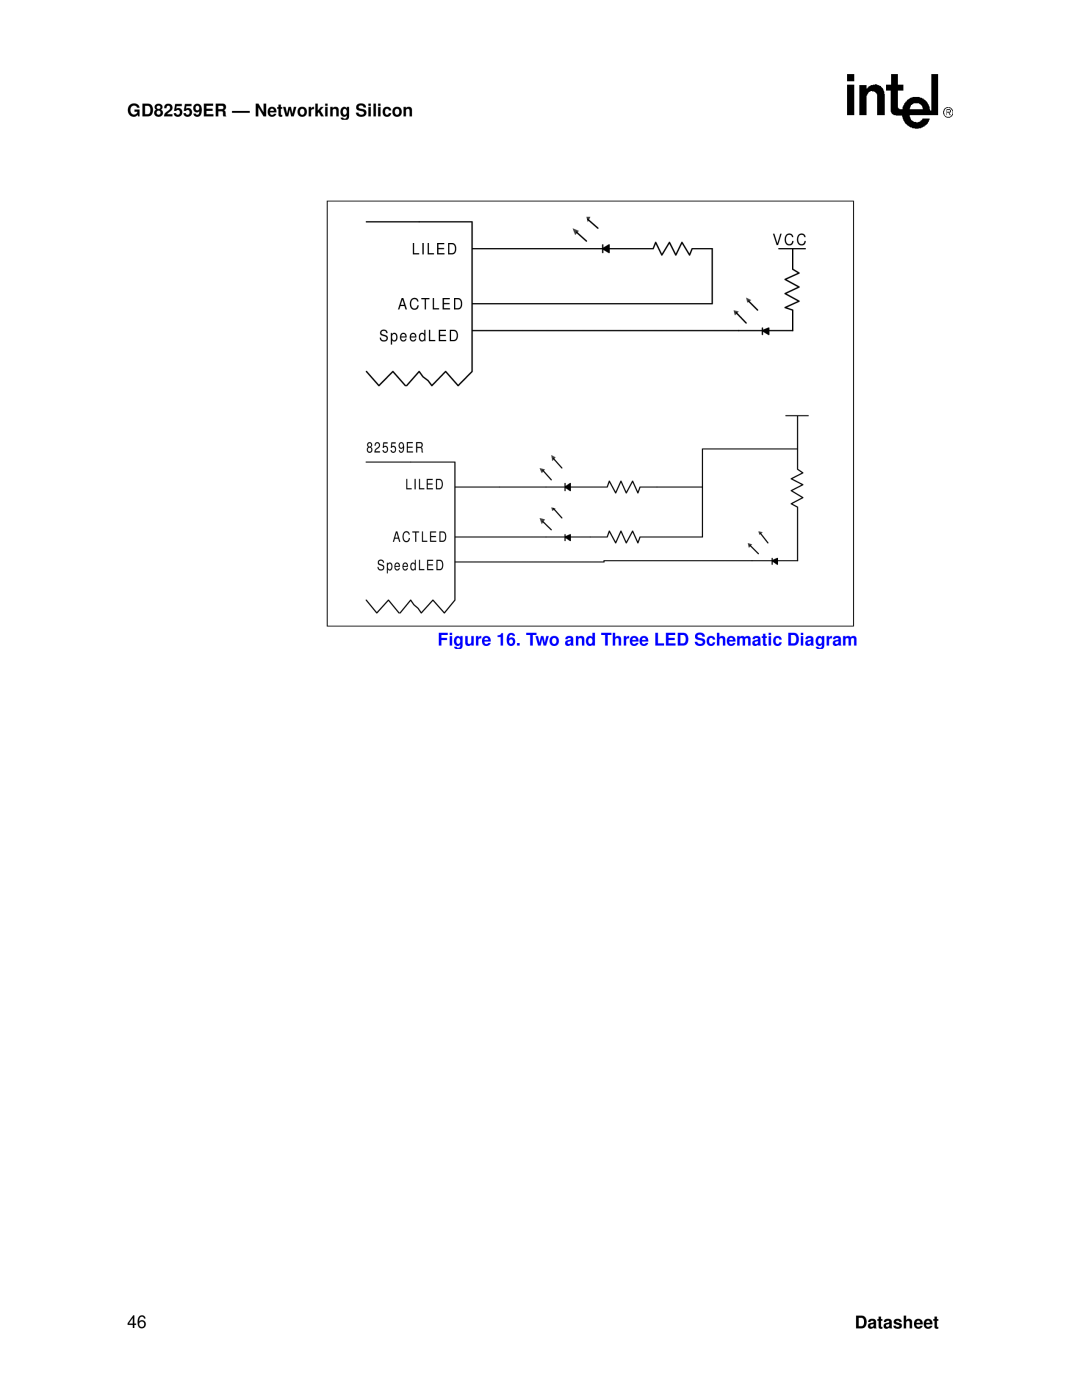 Intel manual Two and Three LED Schematic Diagram, GD82559ER - Networkin g Silicon, Datasheet, Liled, A C T L E D, V C C 